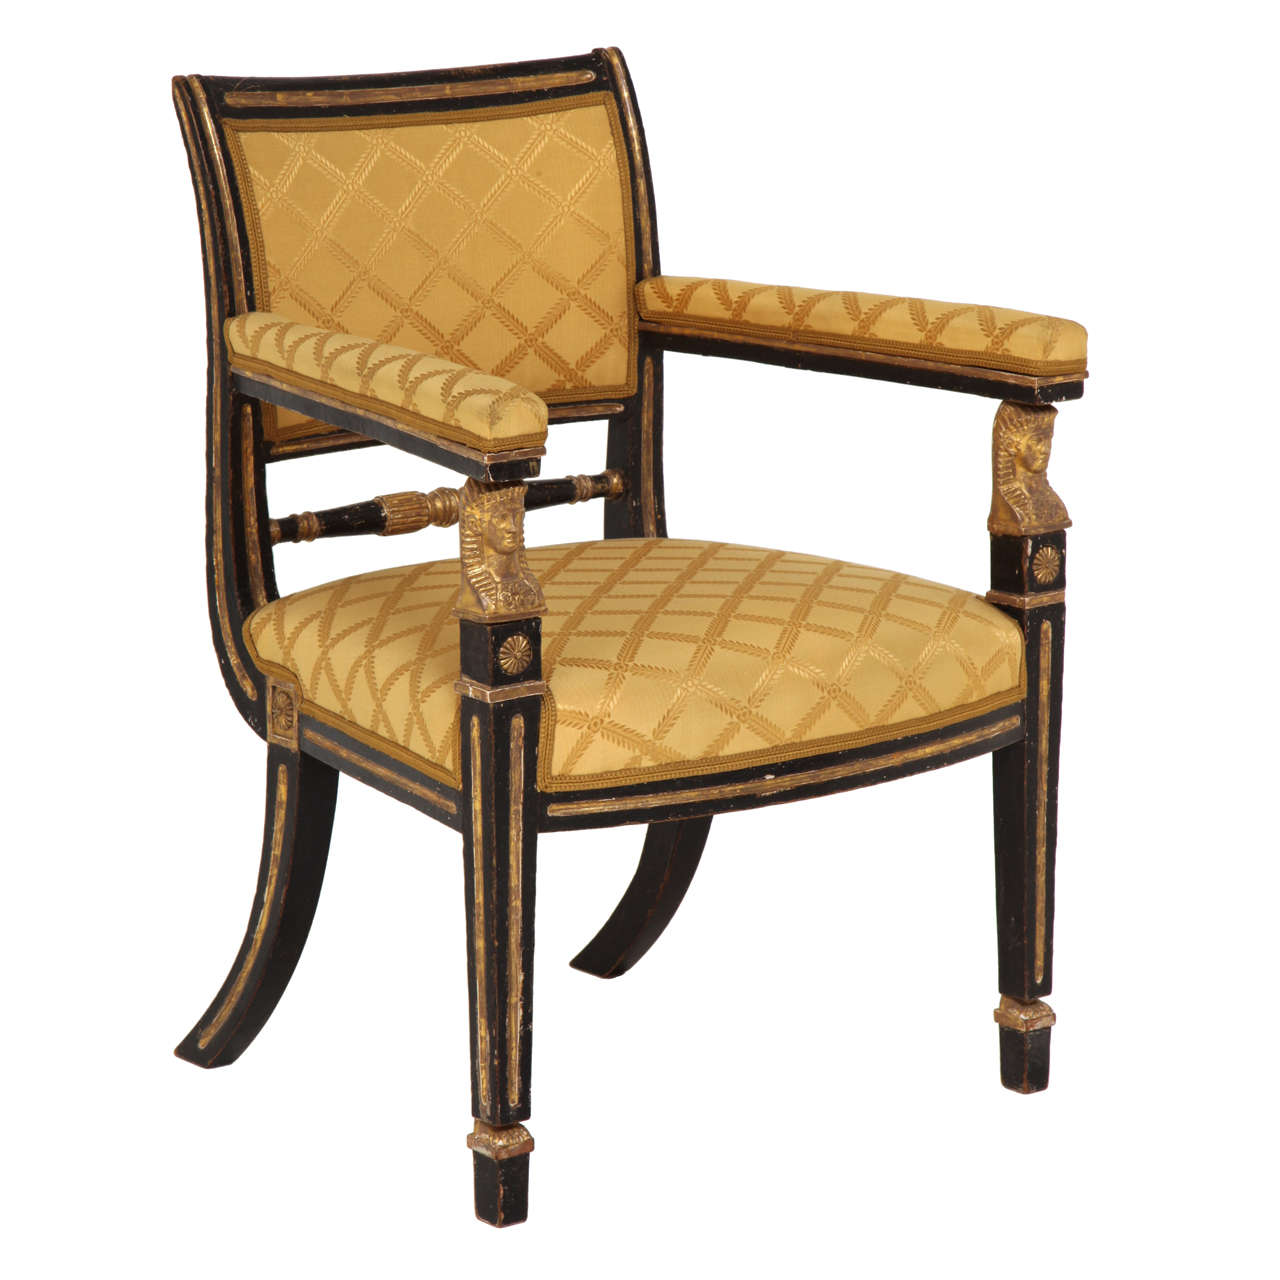 Regency Painted Armchair with Egyptian Motifs For Sale